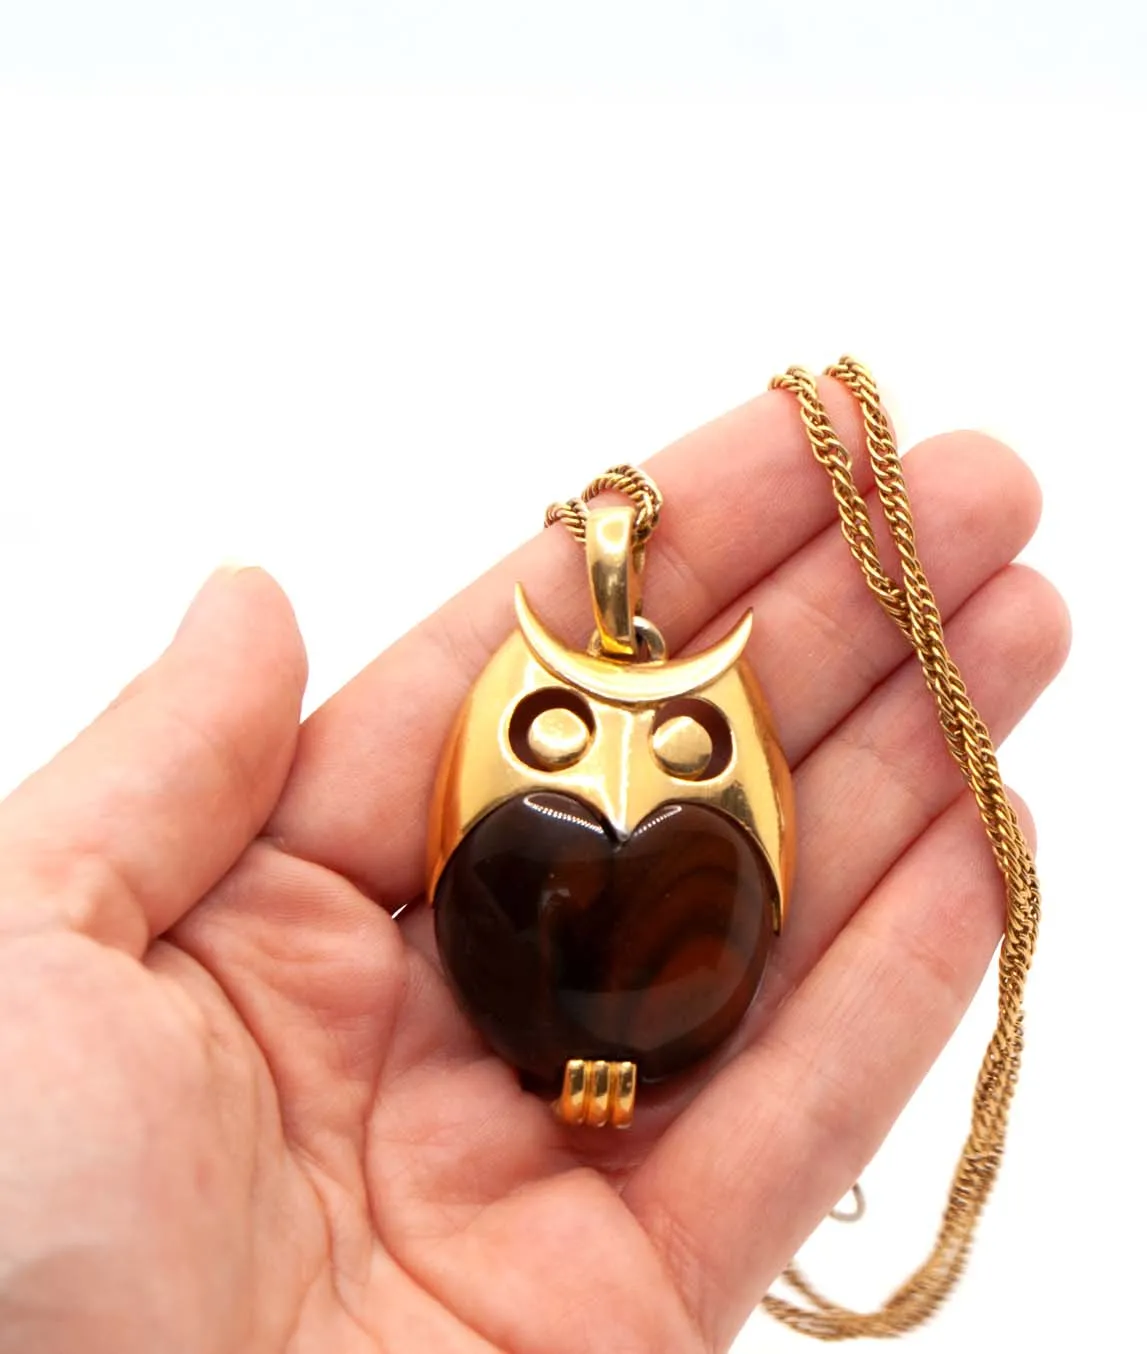 Brown and gold Trifari owl pendant held in a hand